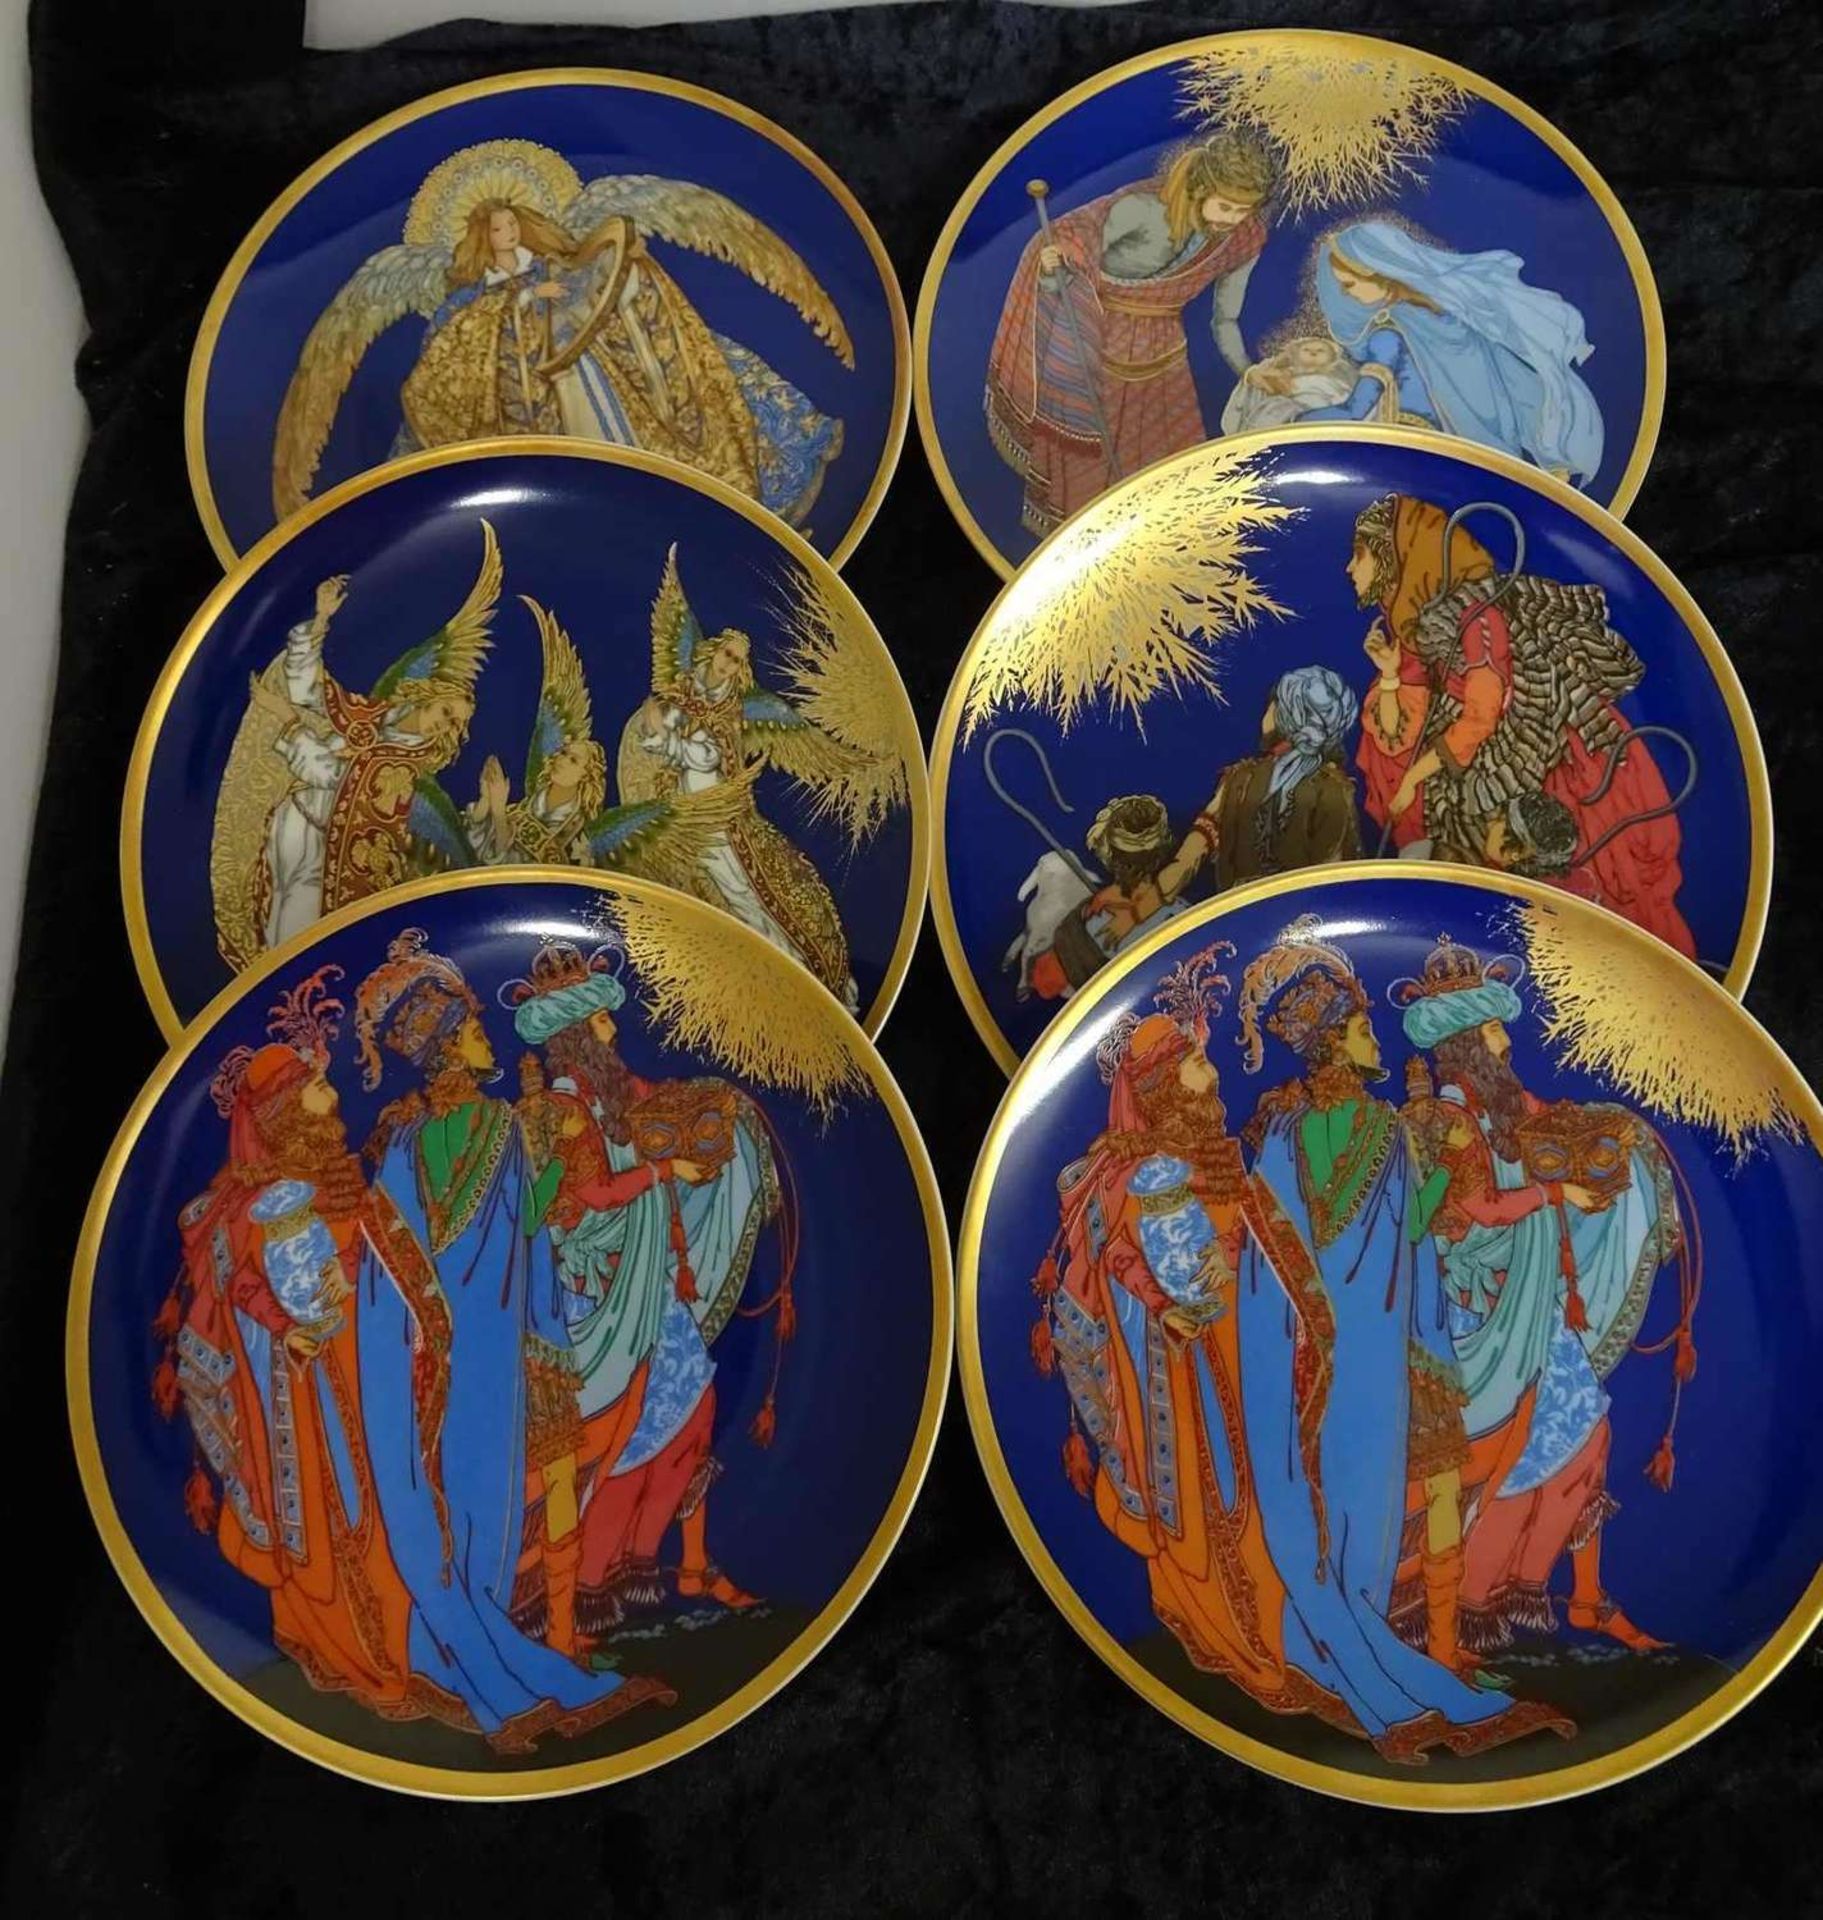 Hutschenreuther wall plates, a total of 6 pieces, designed by William & Charlotte Hallett. "